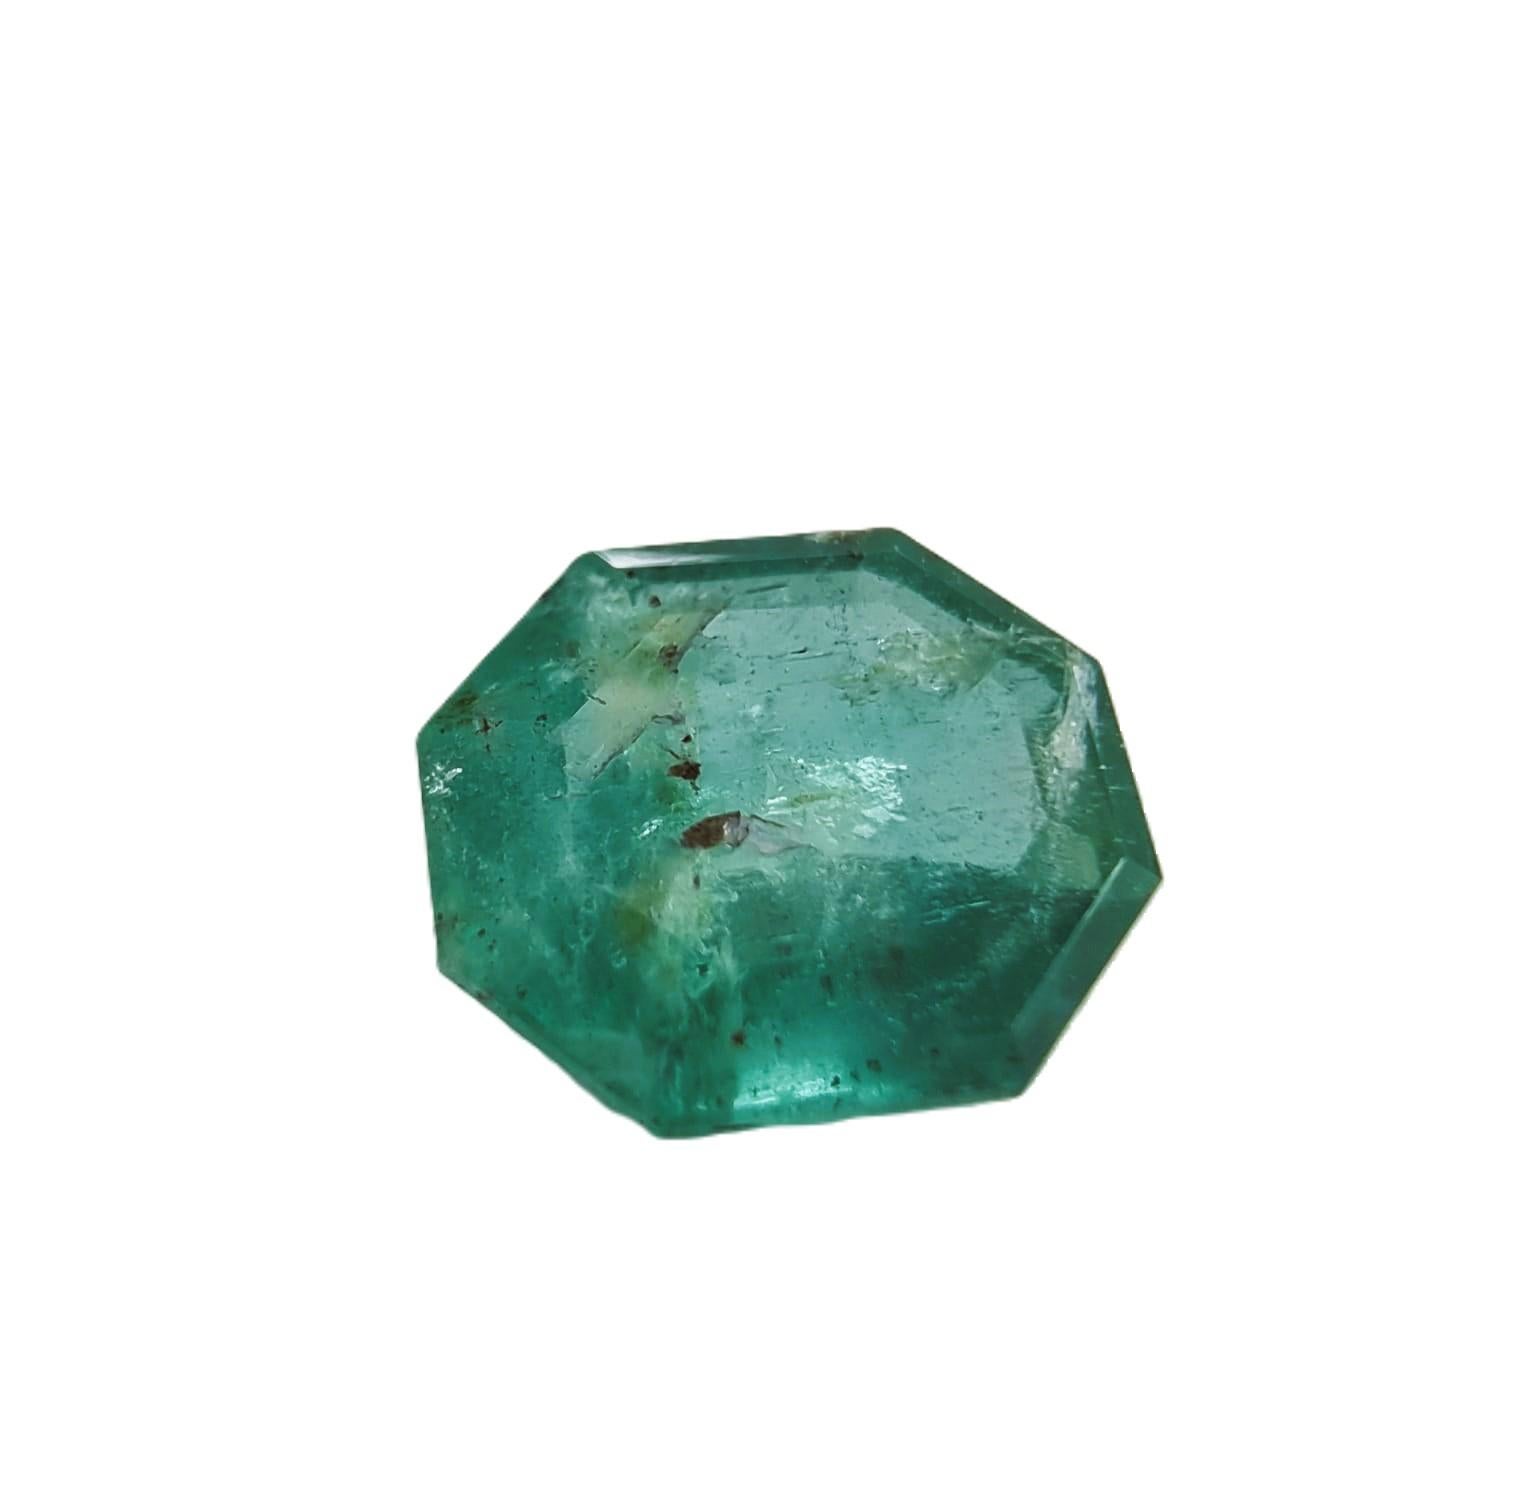 Women's or Men's 2.02ct Octagonal Cut No-Oil Natural Untreated Emerald Gemstone For Sale